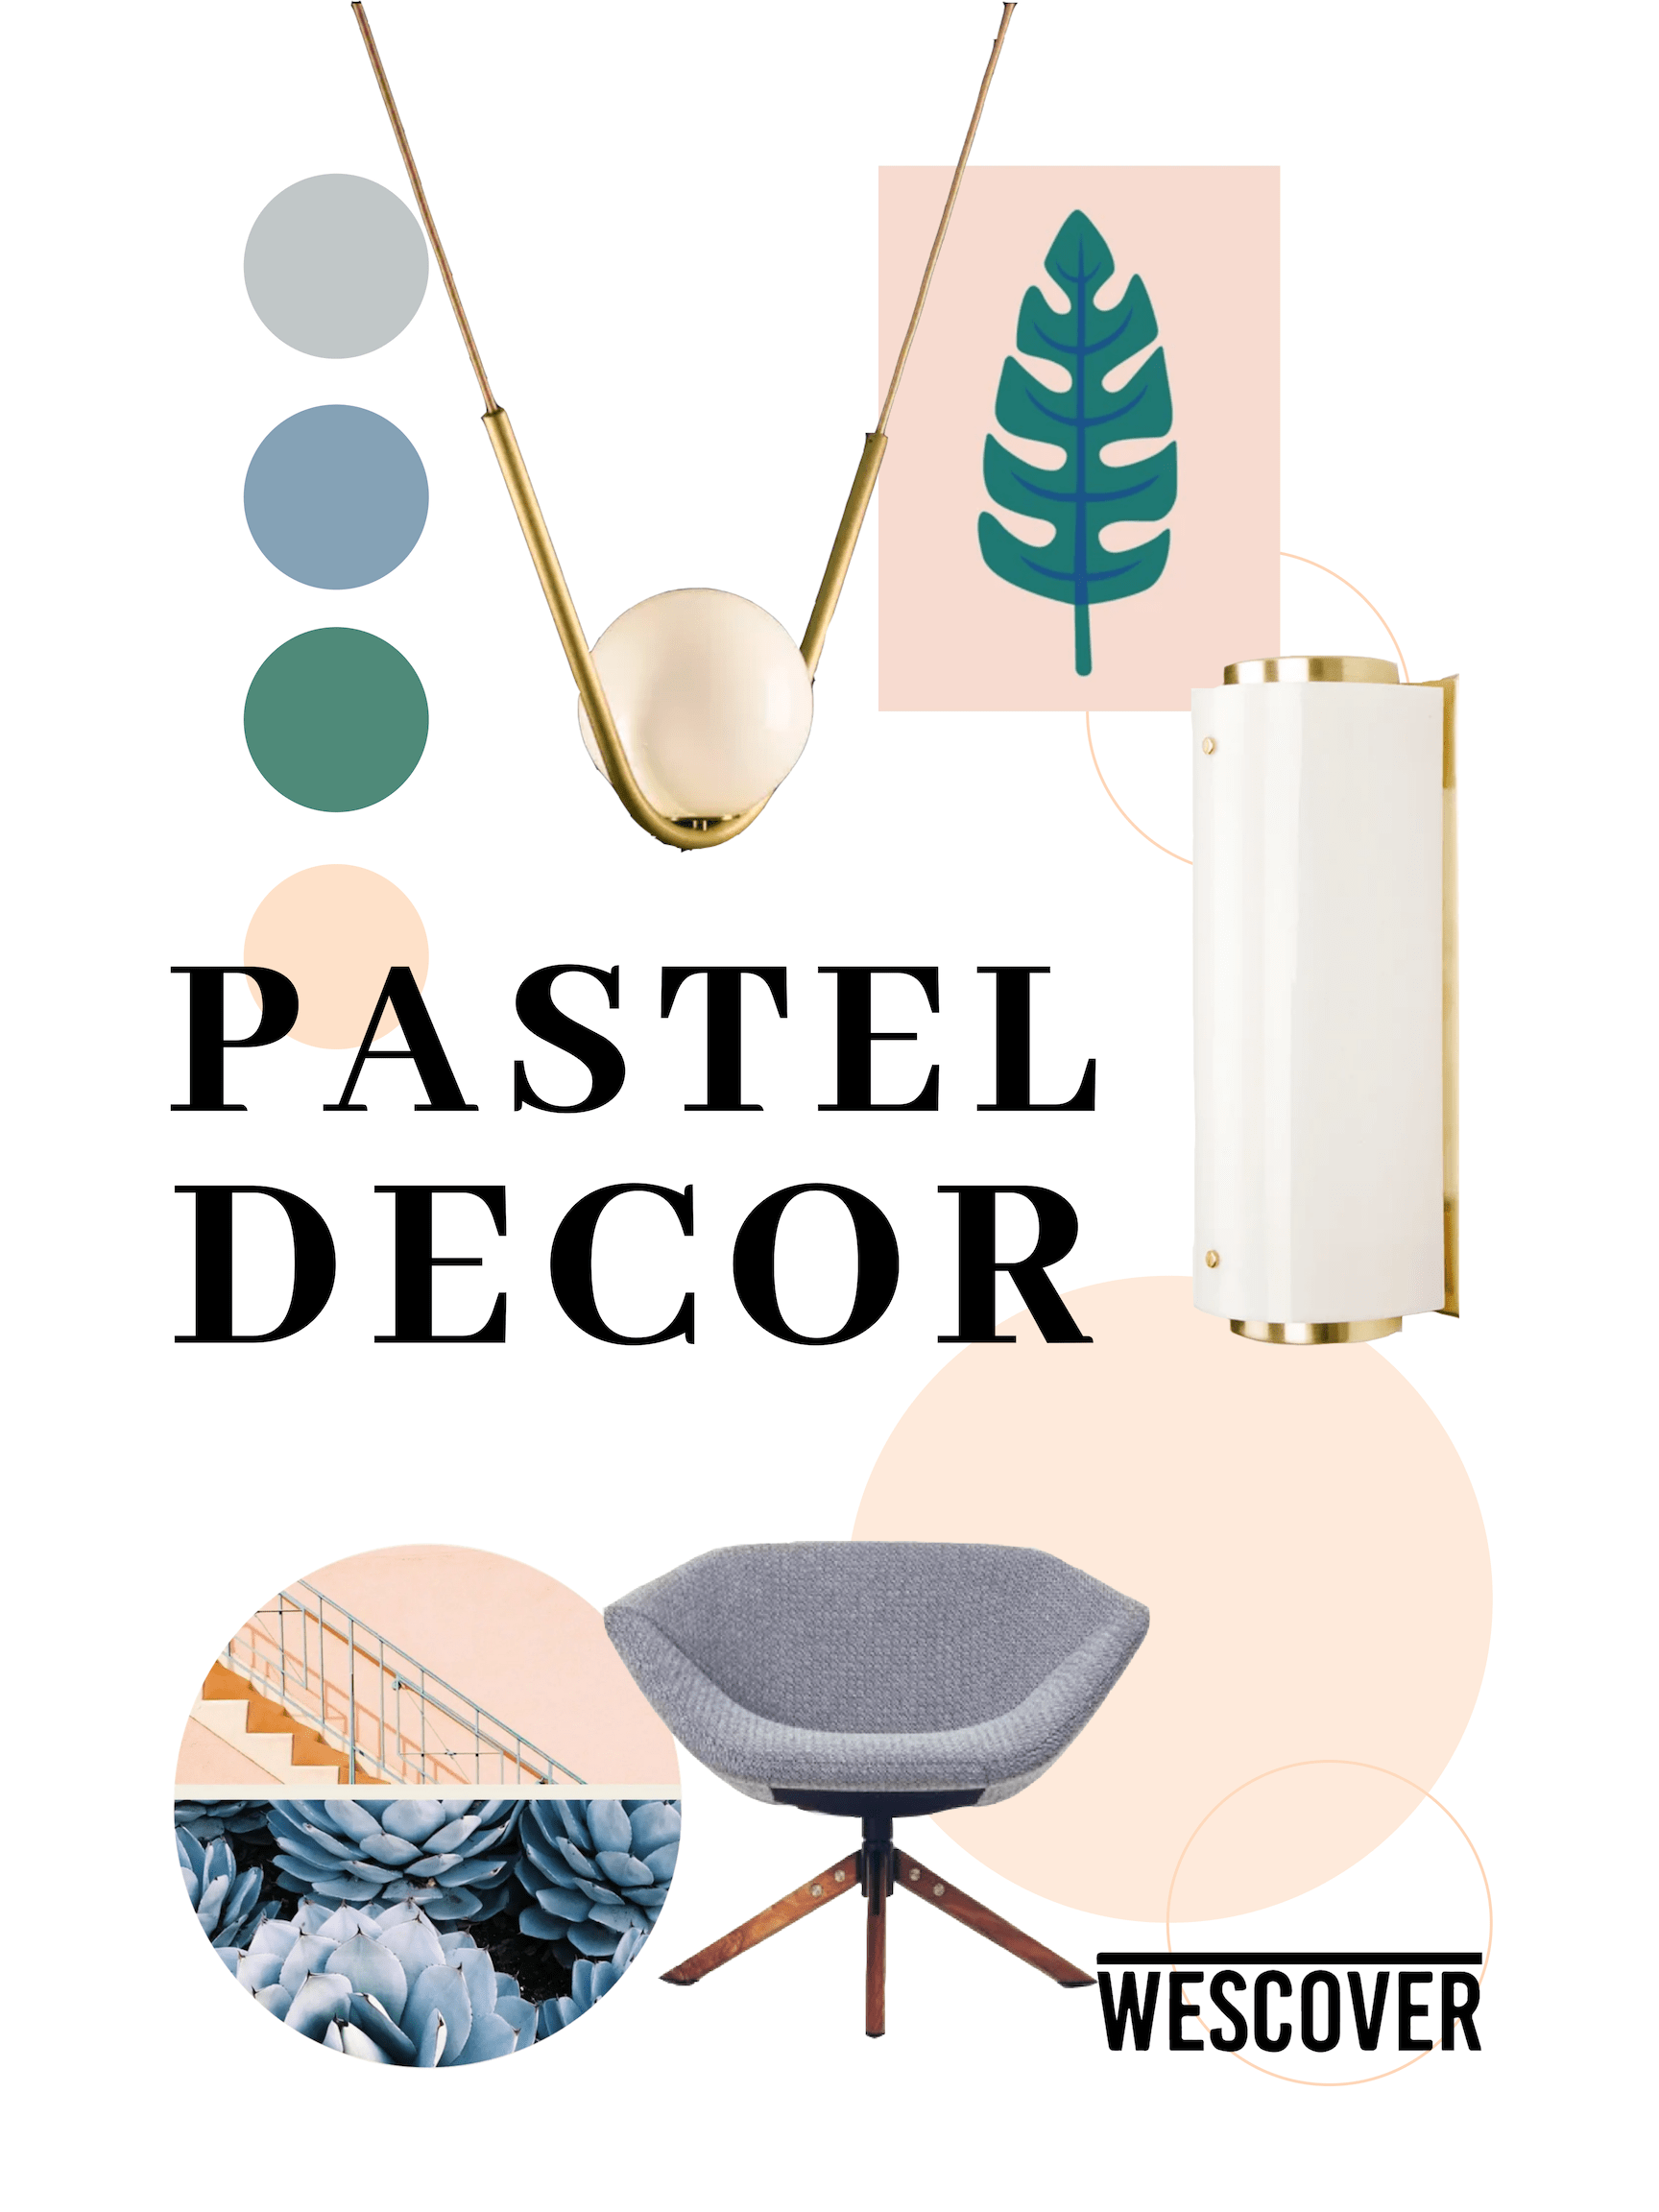 Pastel Decor Moodboard. All items displayed are seen on Wescover.